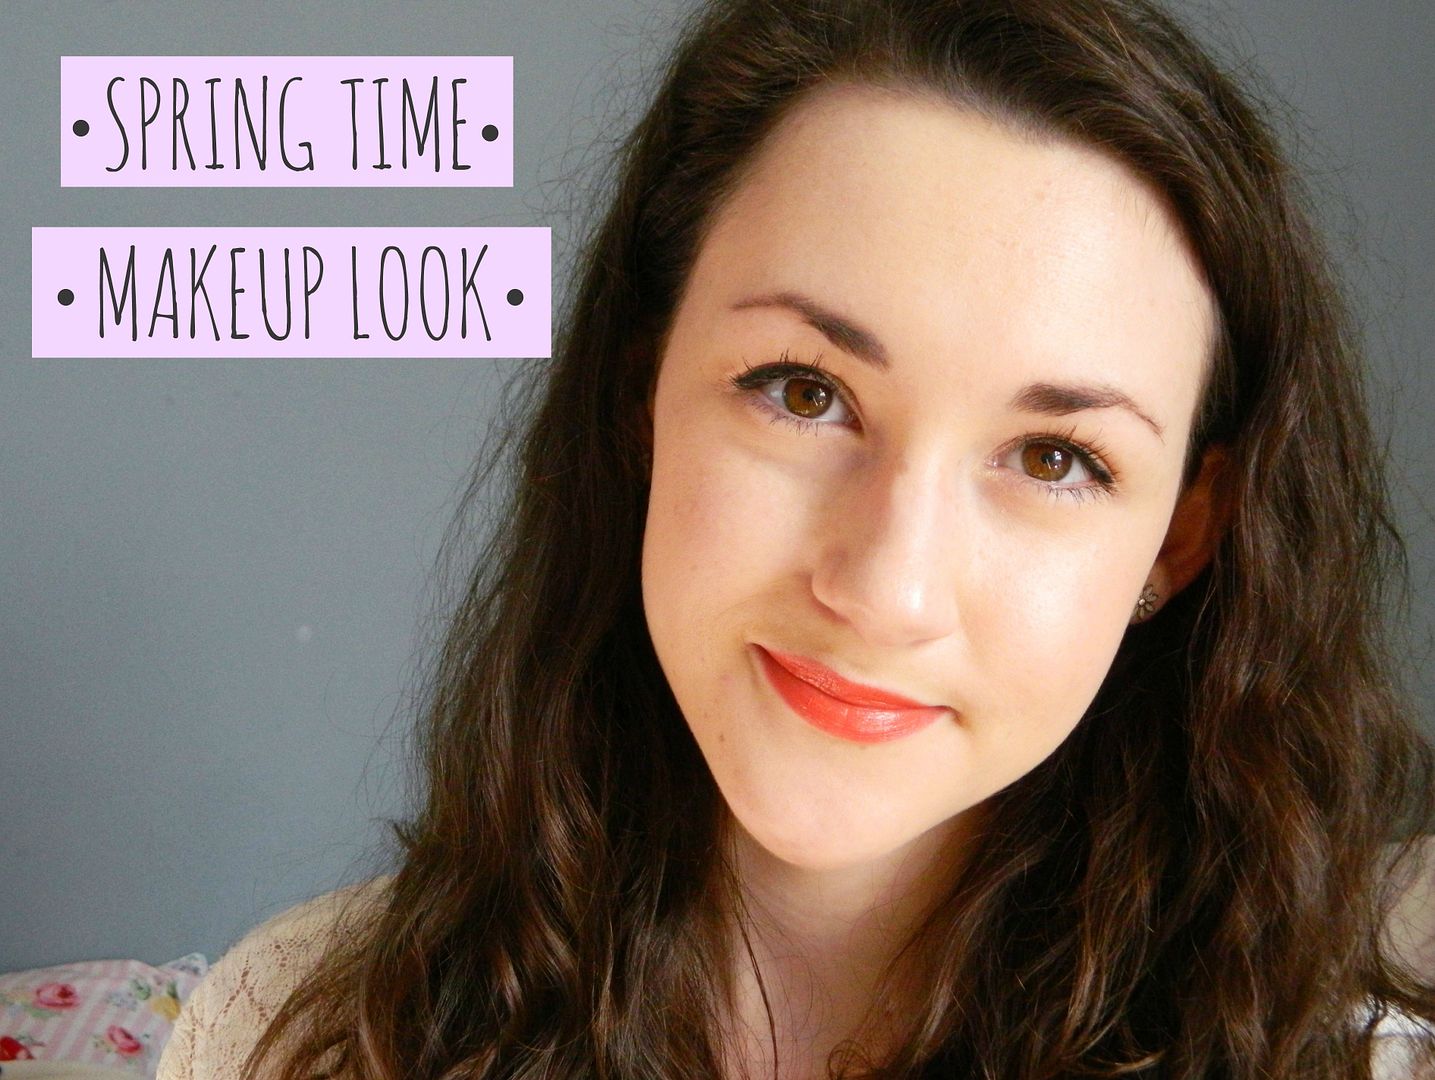 Spring-Time-Makeup-Look-Topshop-Infrared-Belle-Amie-UK-Beauty-Fashion-Lifestyle-Blog